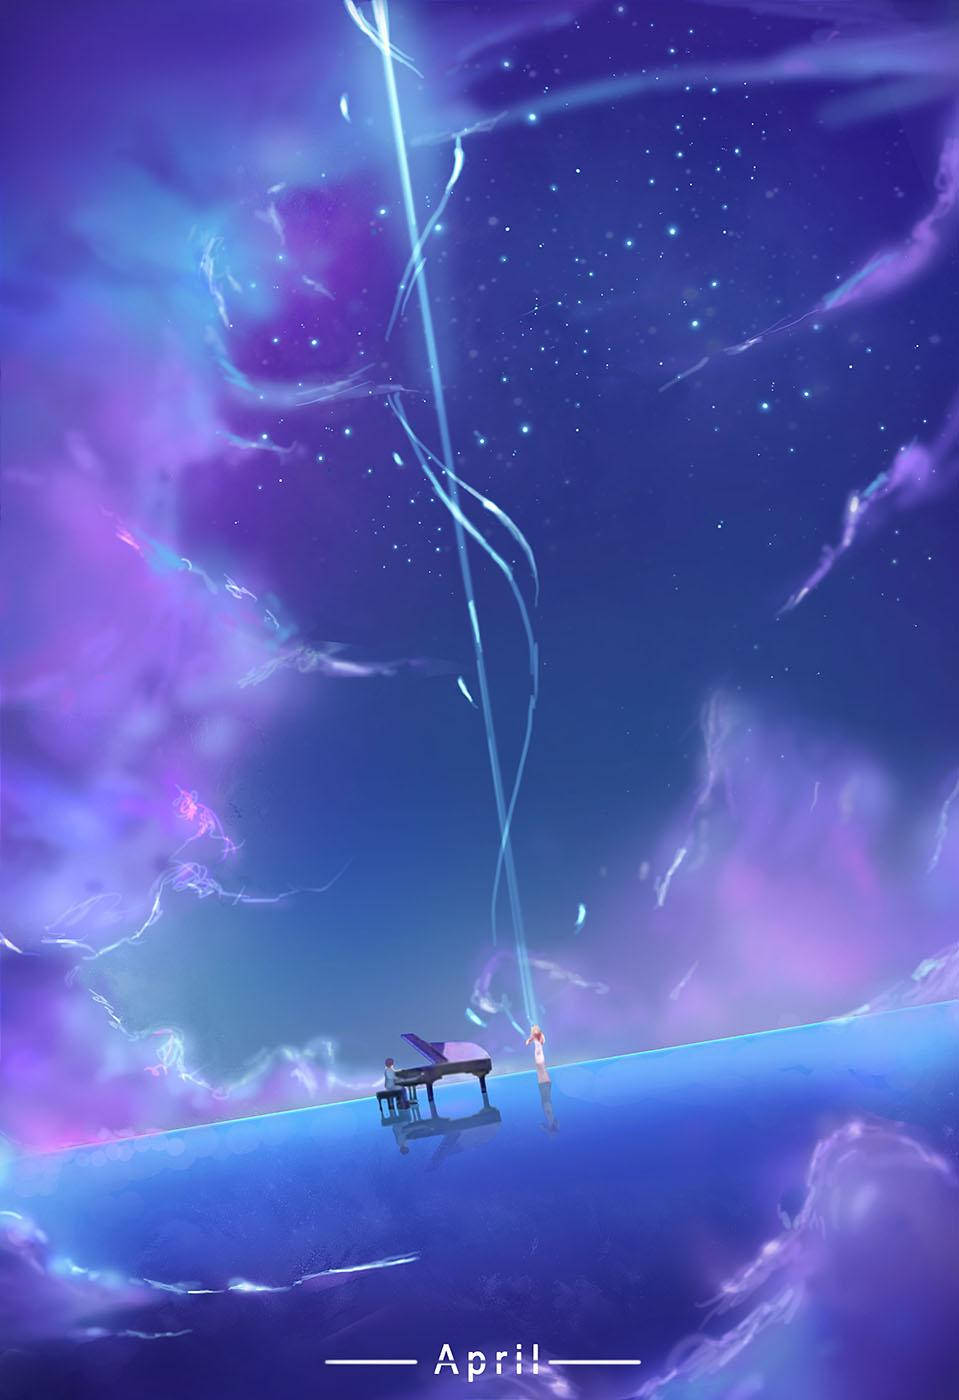 A beautiful blue aesthetic of the hit anime series “Your Lie In April”. Wallpaper